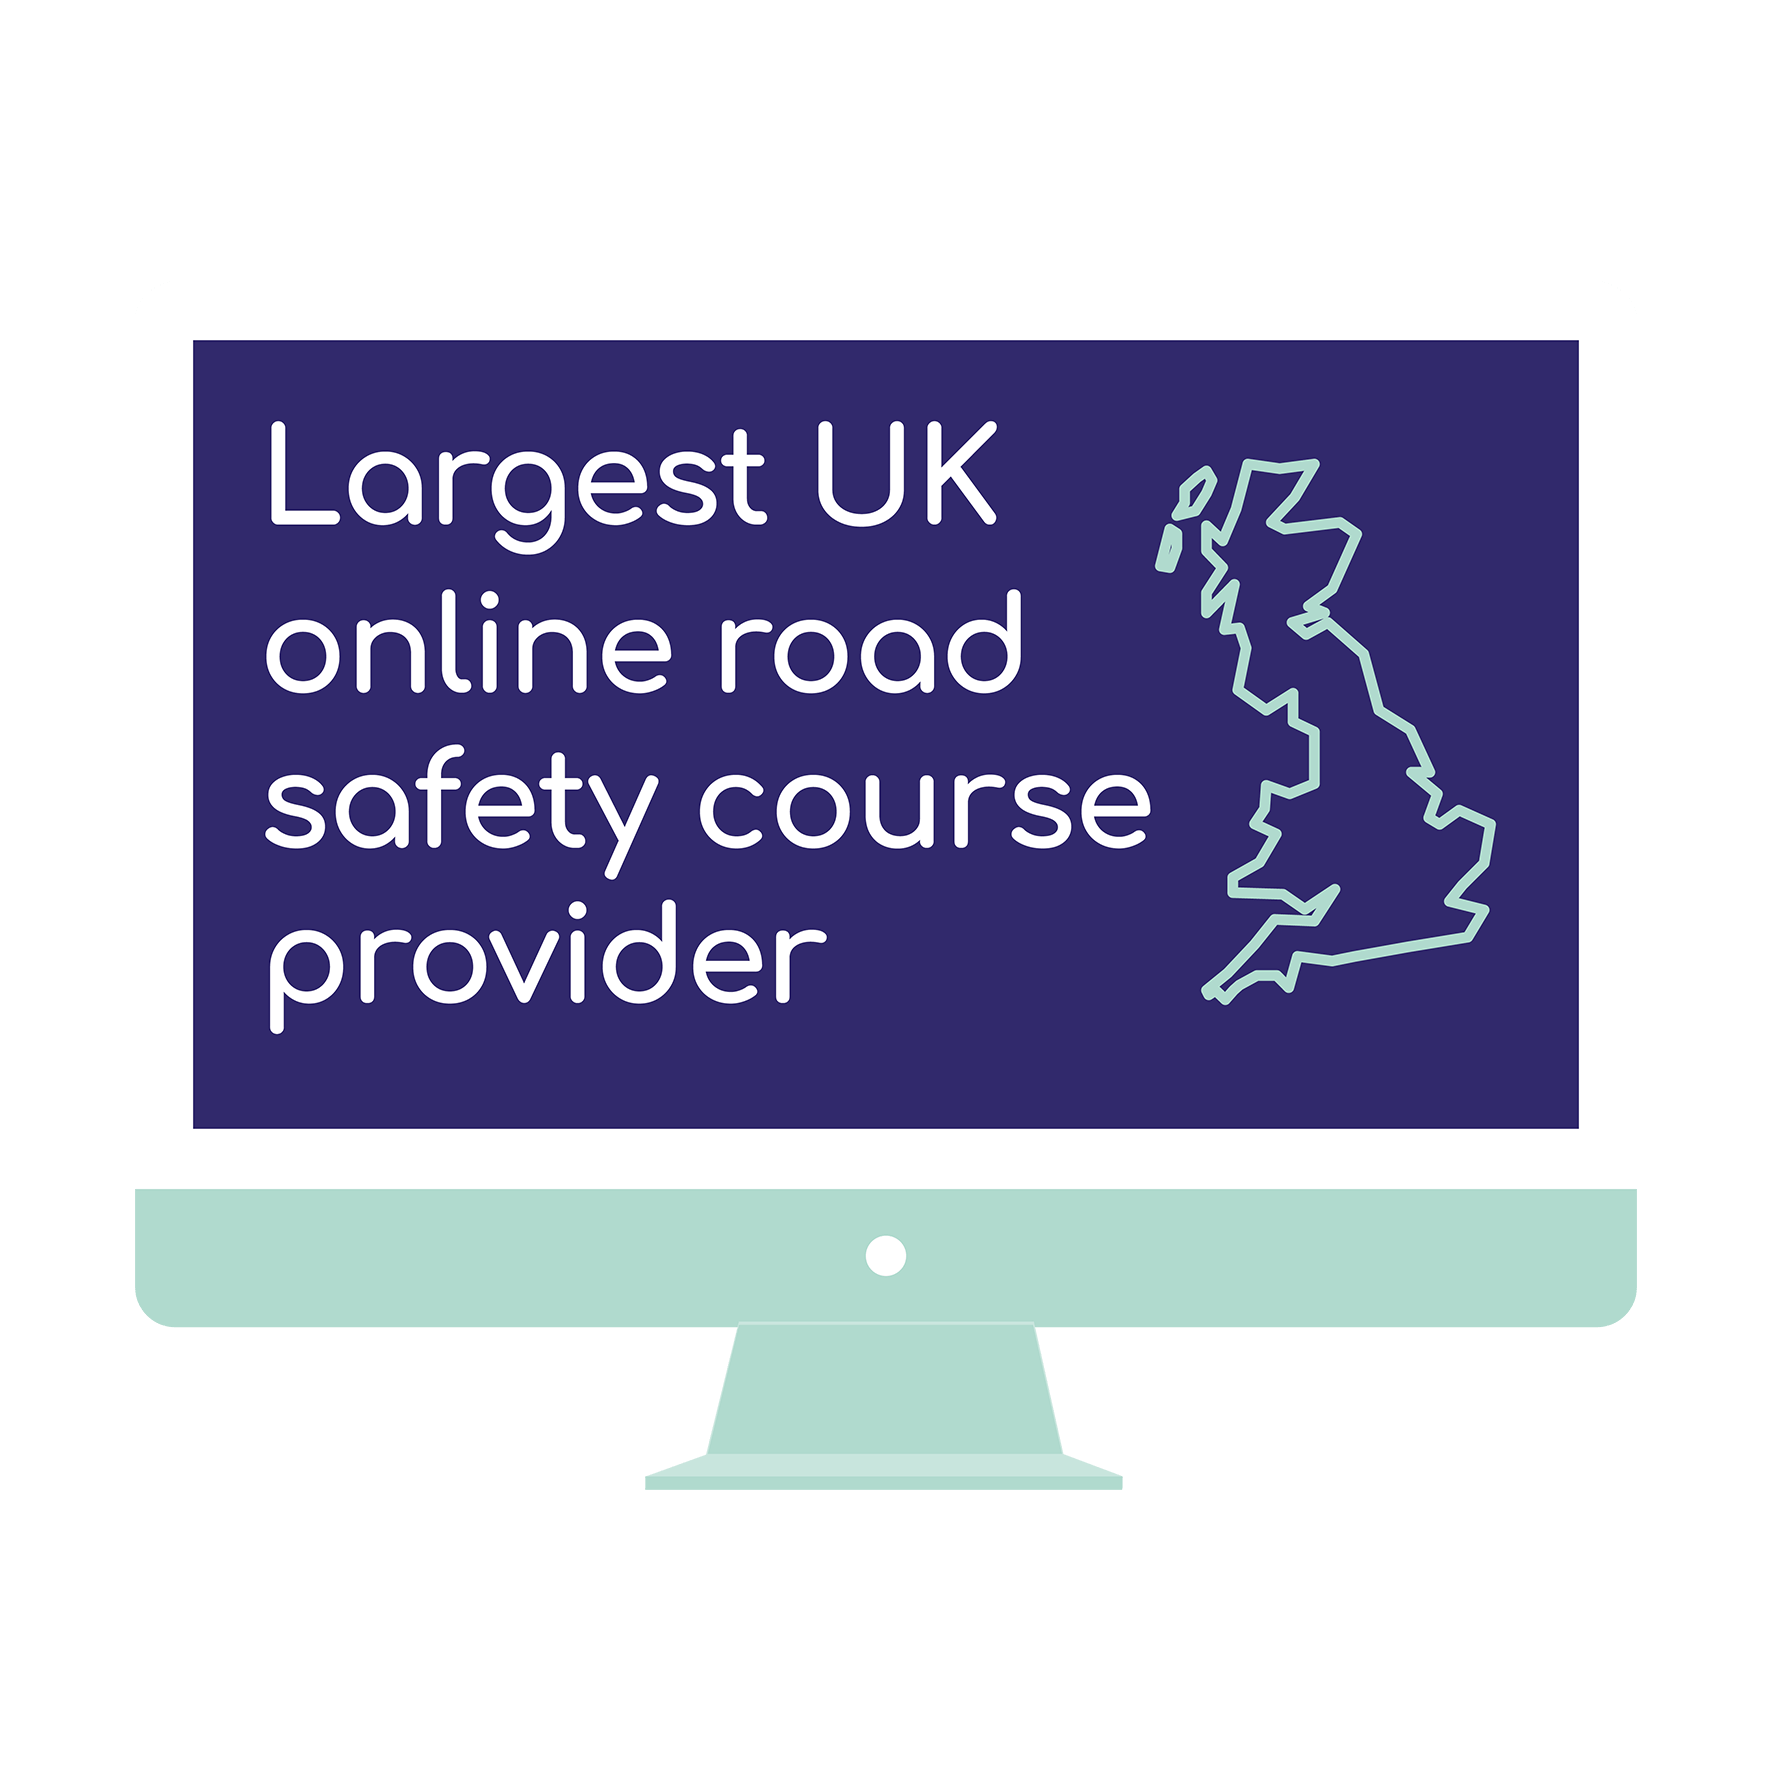 Largest UK online road safety course provider